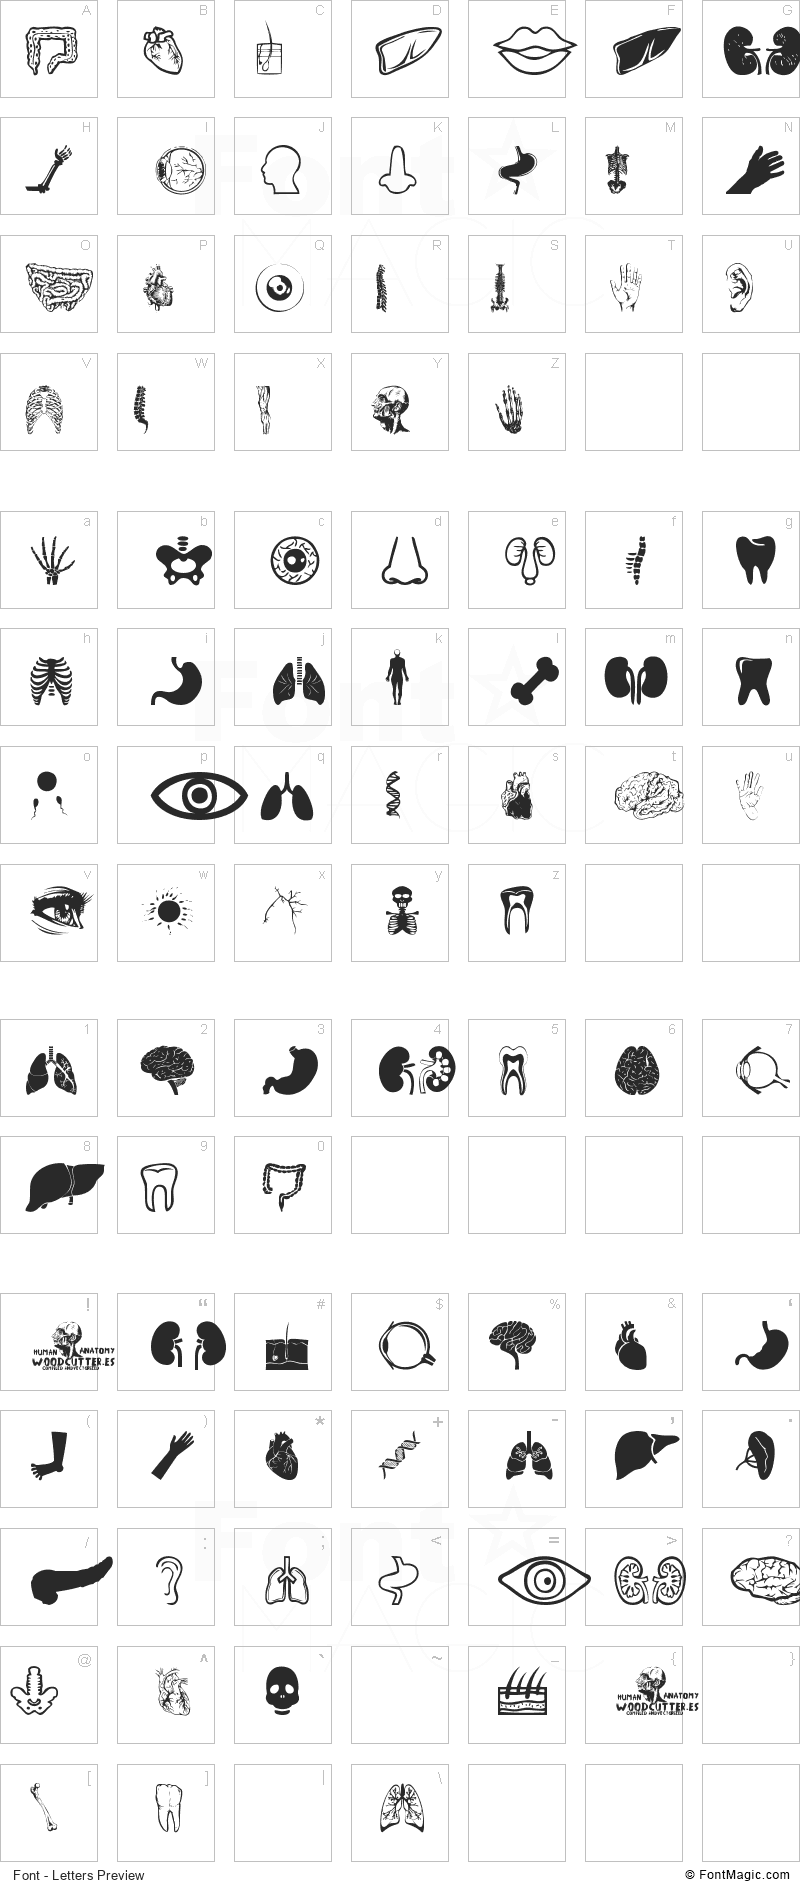 Human Anatomy Font - All Latters Preview Chart